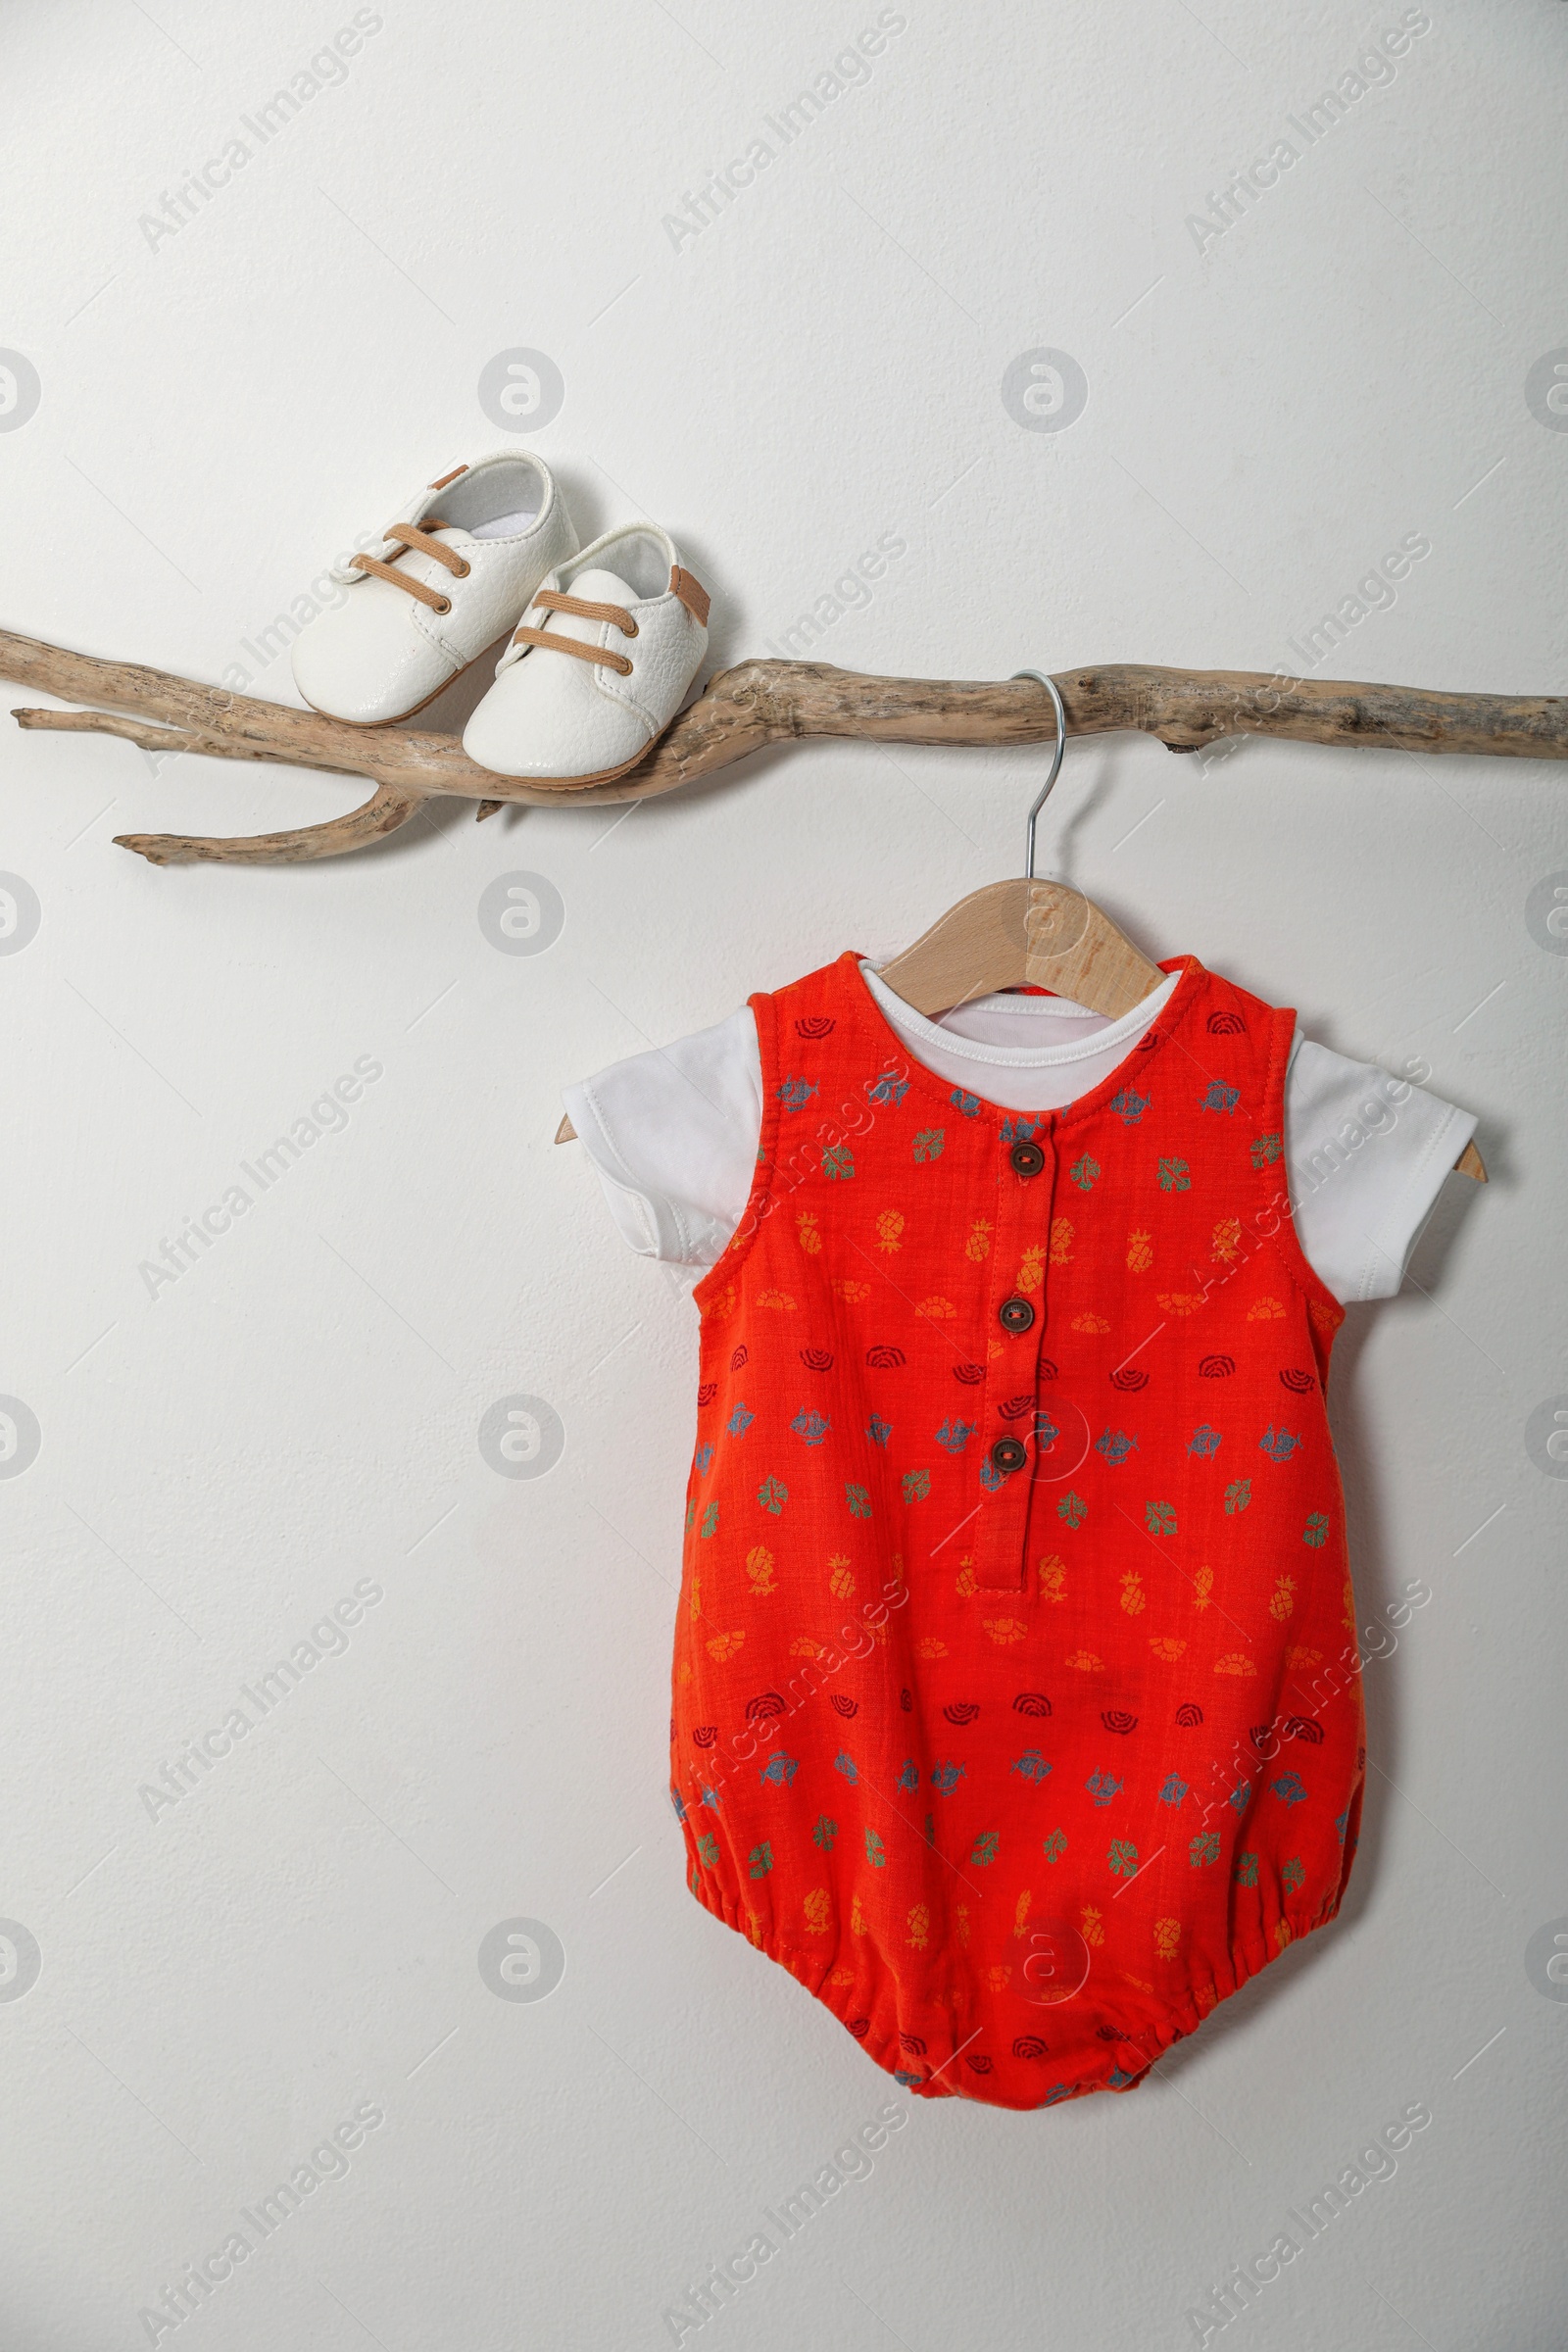 Photo of Baby bodysuit and booties on decorative branch near light grey wall